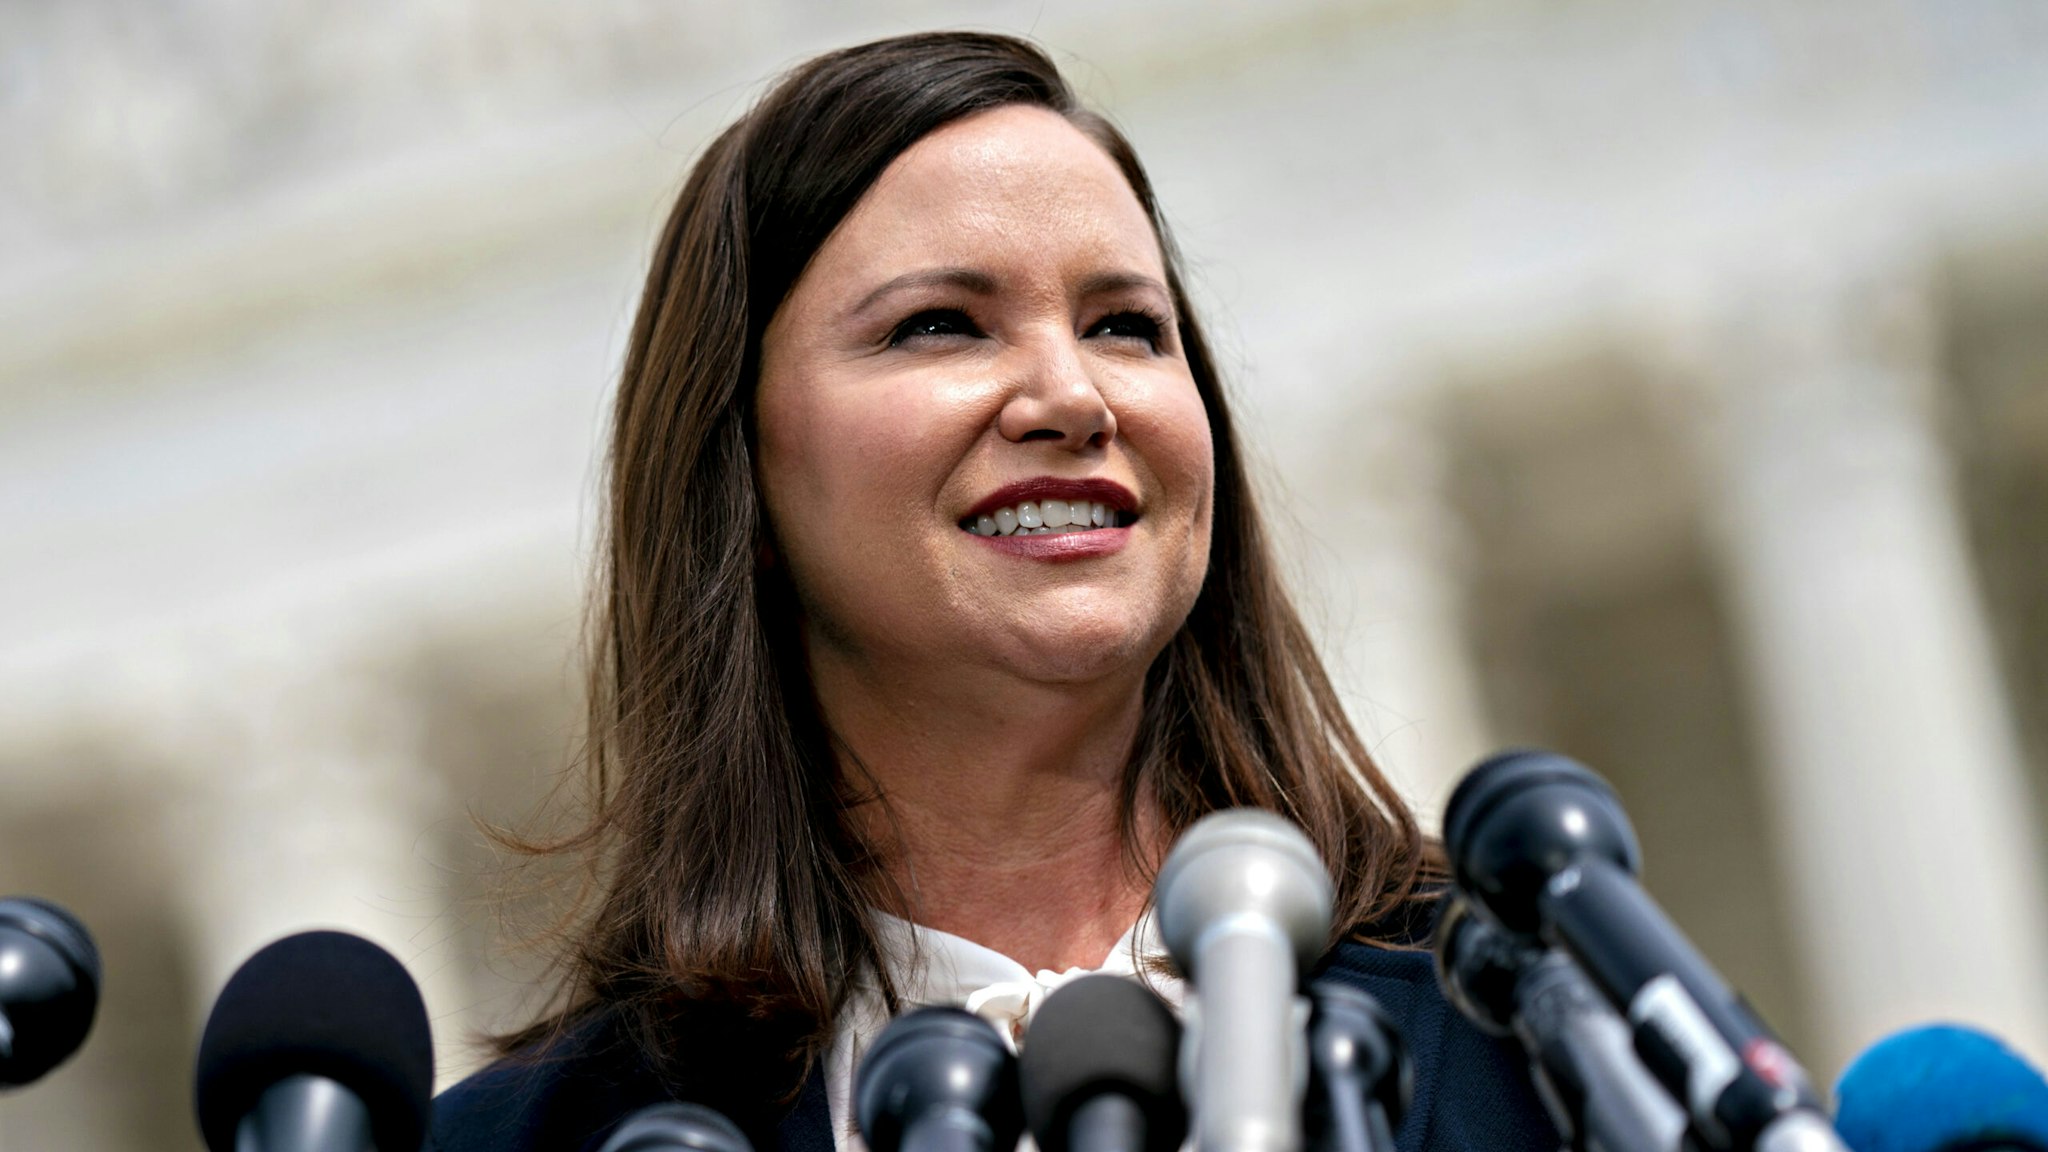 Ashley Moody, Florida attorney general, speaks during a news conference outside the Supreme Court in Washington, D.C., U.S., on Monday, Sept. 9, 2019. A group of 50 attorneys general opened a broad investigation into whether advertising practices of Alphabet Inc.'s Google violate antitrust laws.